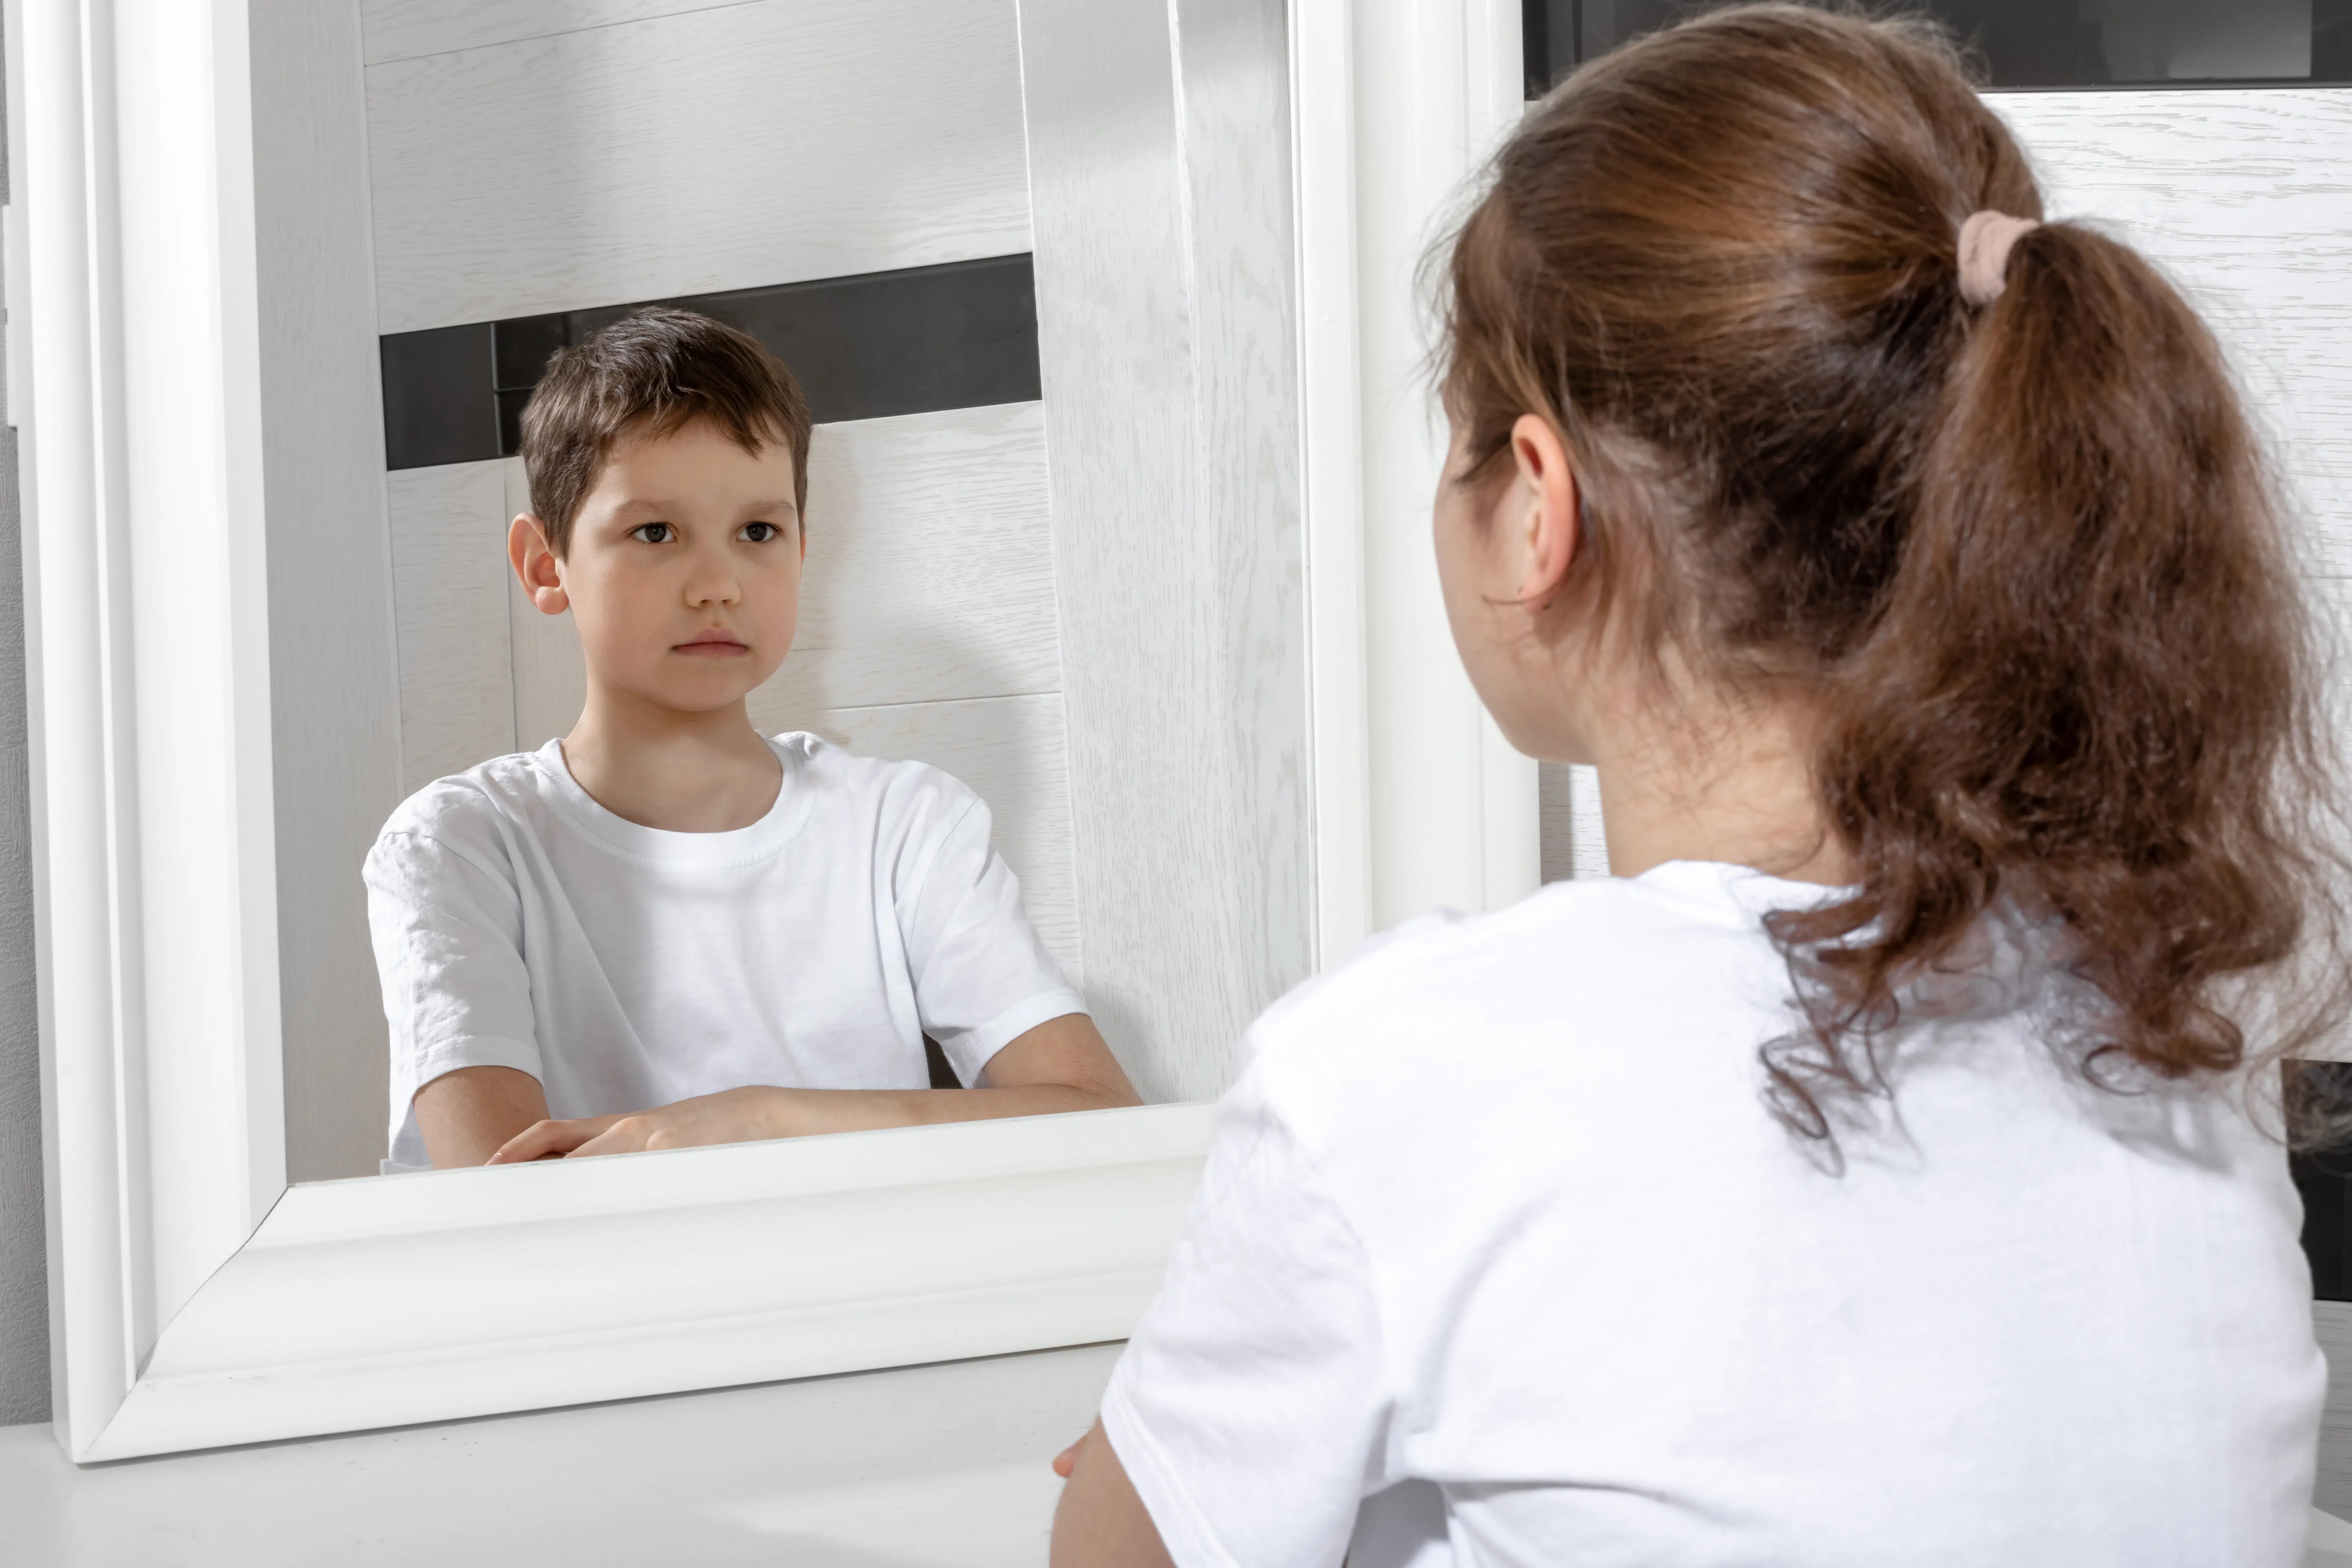 girl looking in mirror and seeing boy - concept of transgenderism